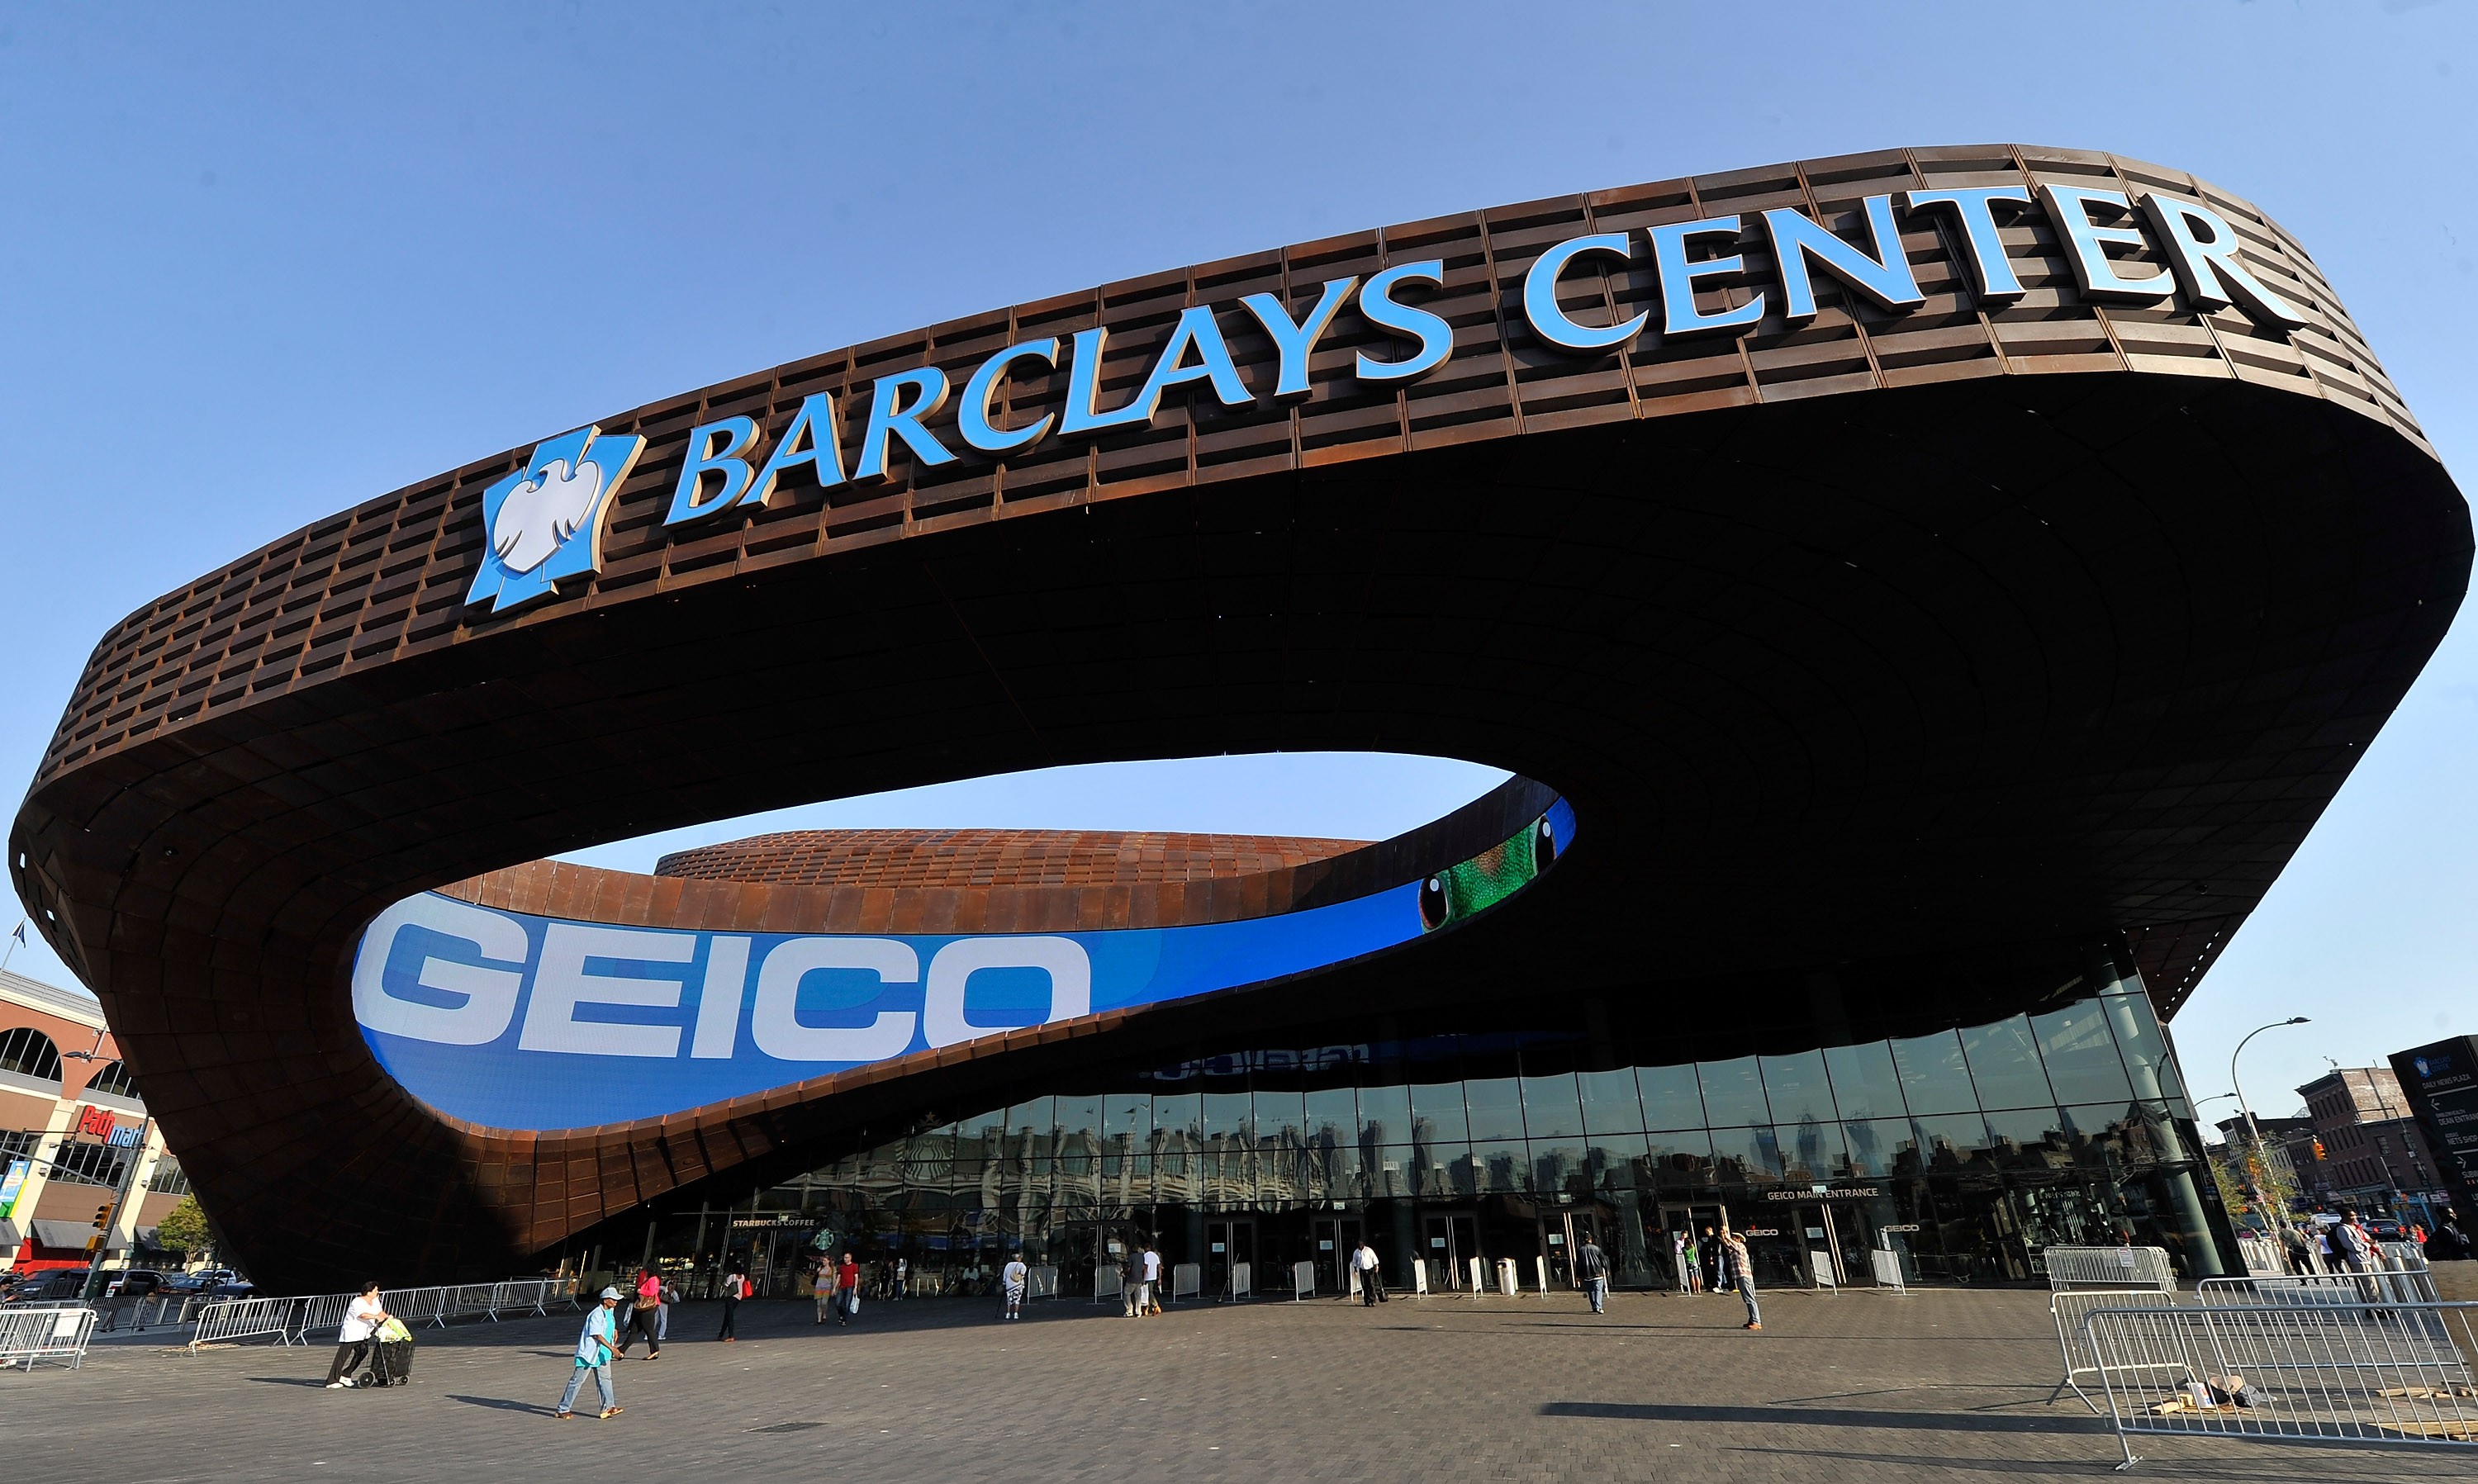 50 cool photos of Barclay Center, New York : Places : BOOMSbeat